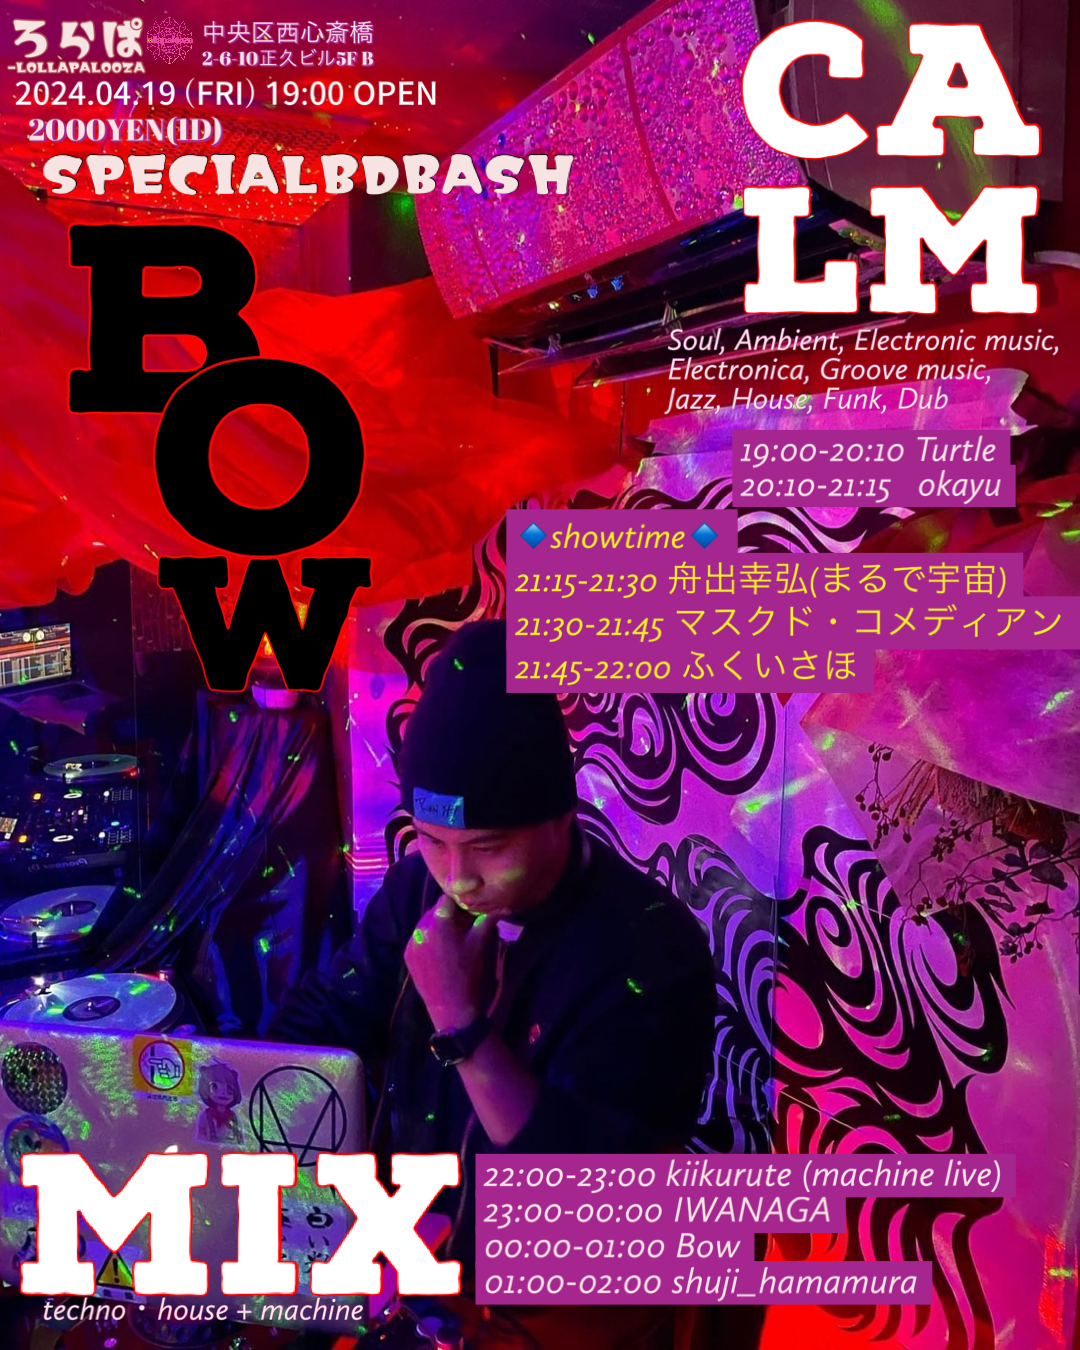 CALM×MIX! -SpecialBDBASH- Bow @bow_west - フライヤー表